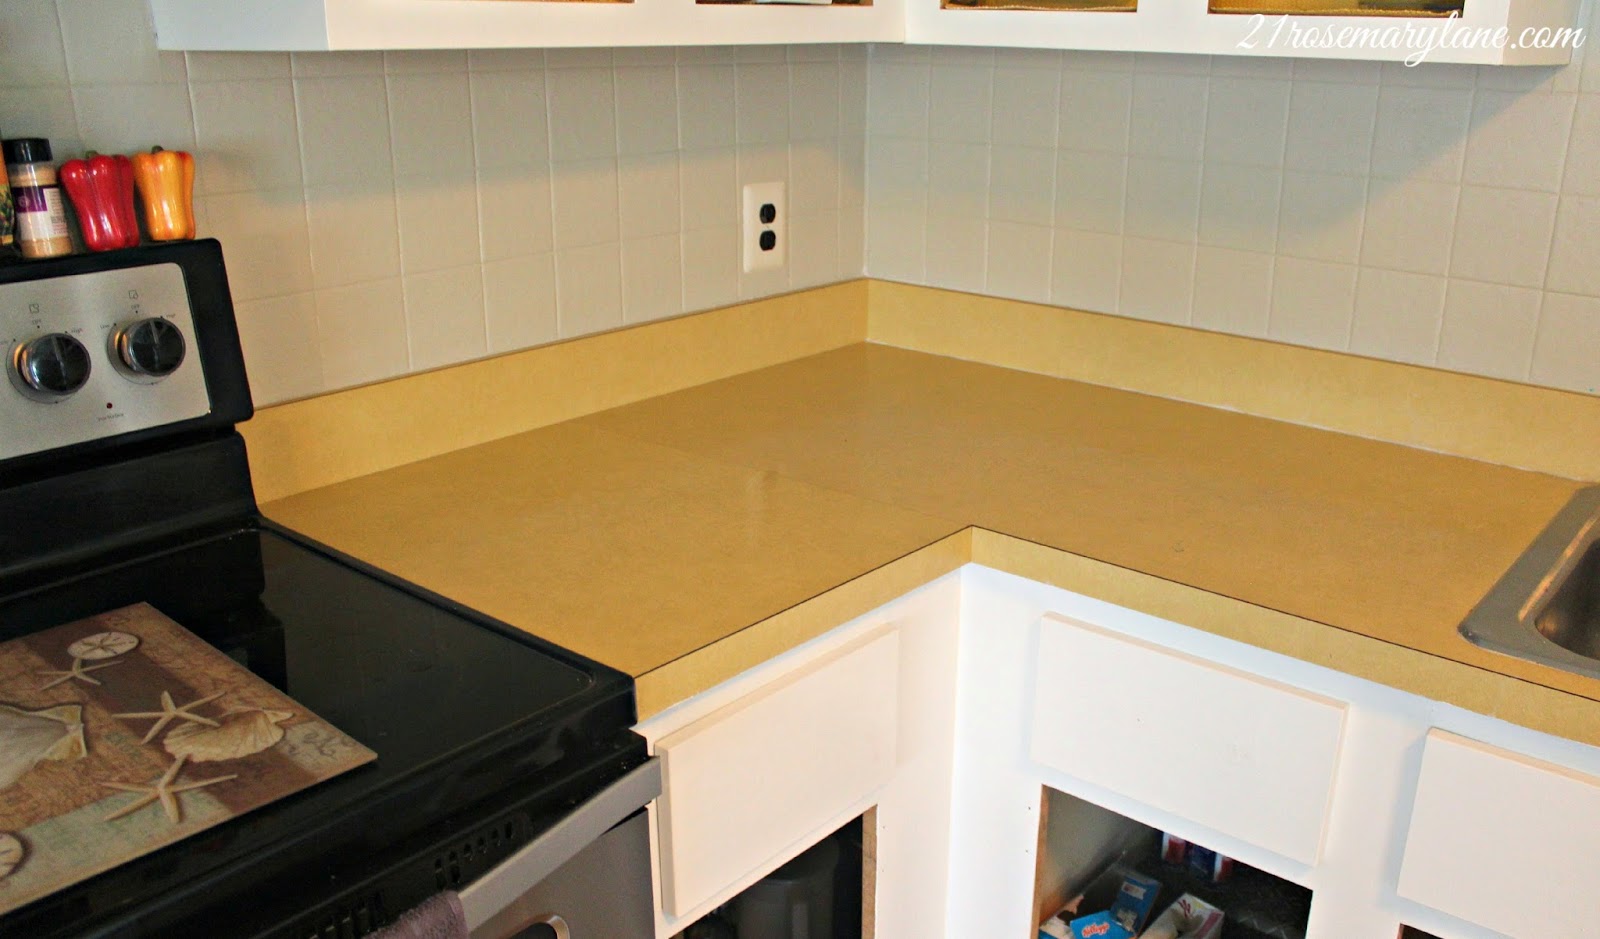 21 Rosemary Lane Transformation Of A 1970 S Formica Countertop